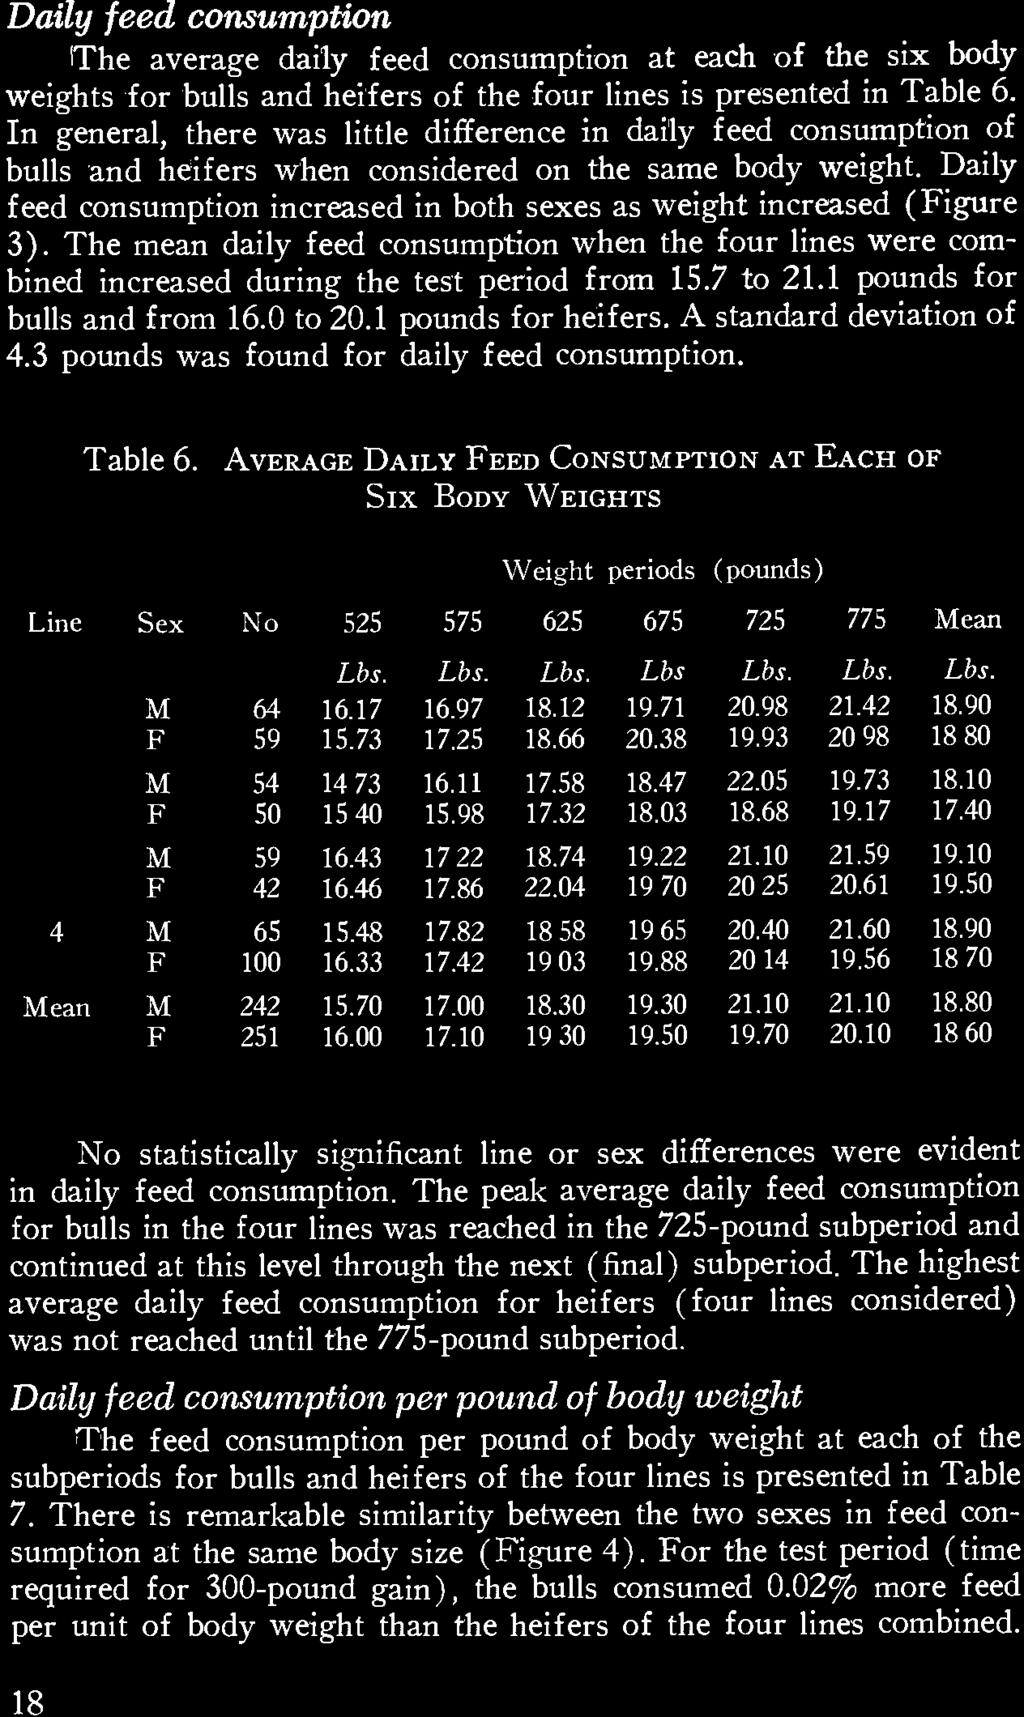 Daily feed consumption The average daily feed consumption at each of the six body weights for bulls and heifers of the four lines is presented in Table 6.